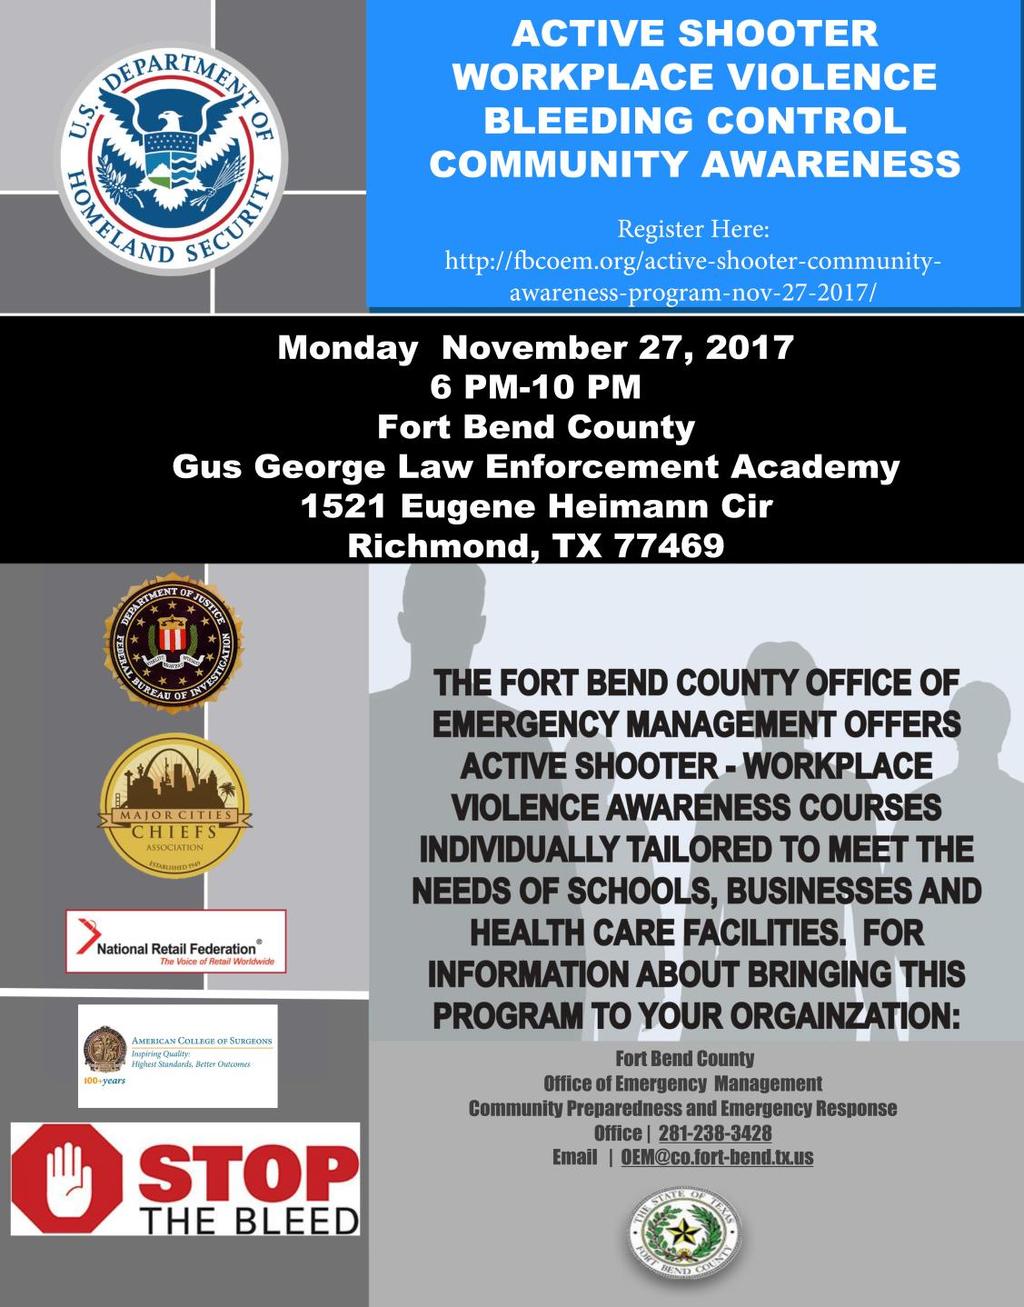 VOLUME 10 ISSUE 2 FORT BEND COUNTY EMERGENCY MANAGEMEN T COMMUNITY PREPARED NESS PAGE 2 Register Here http://fbcoem.